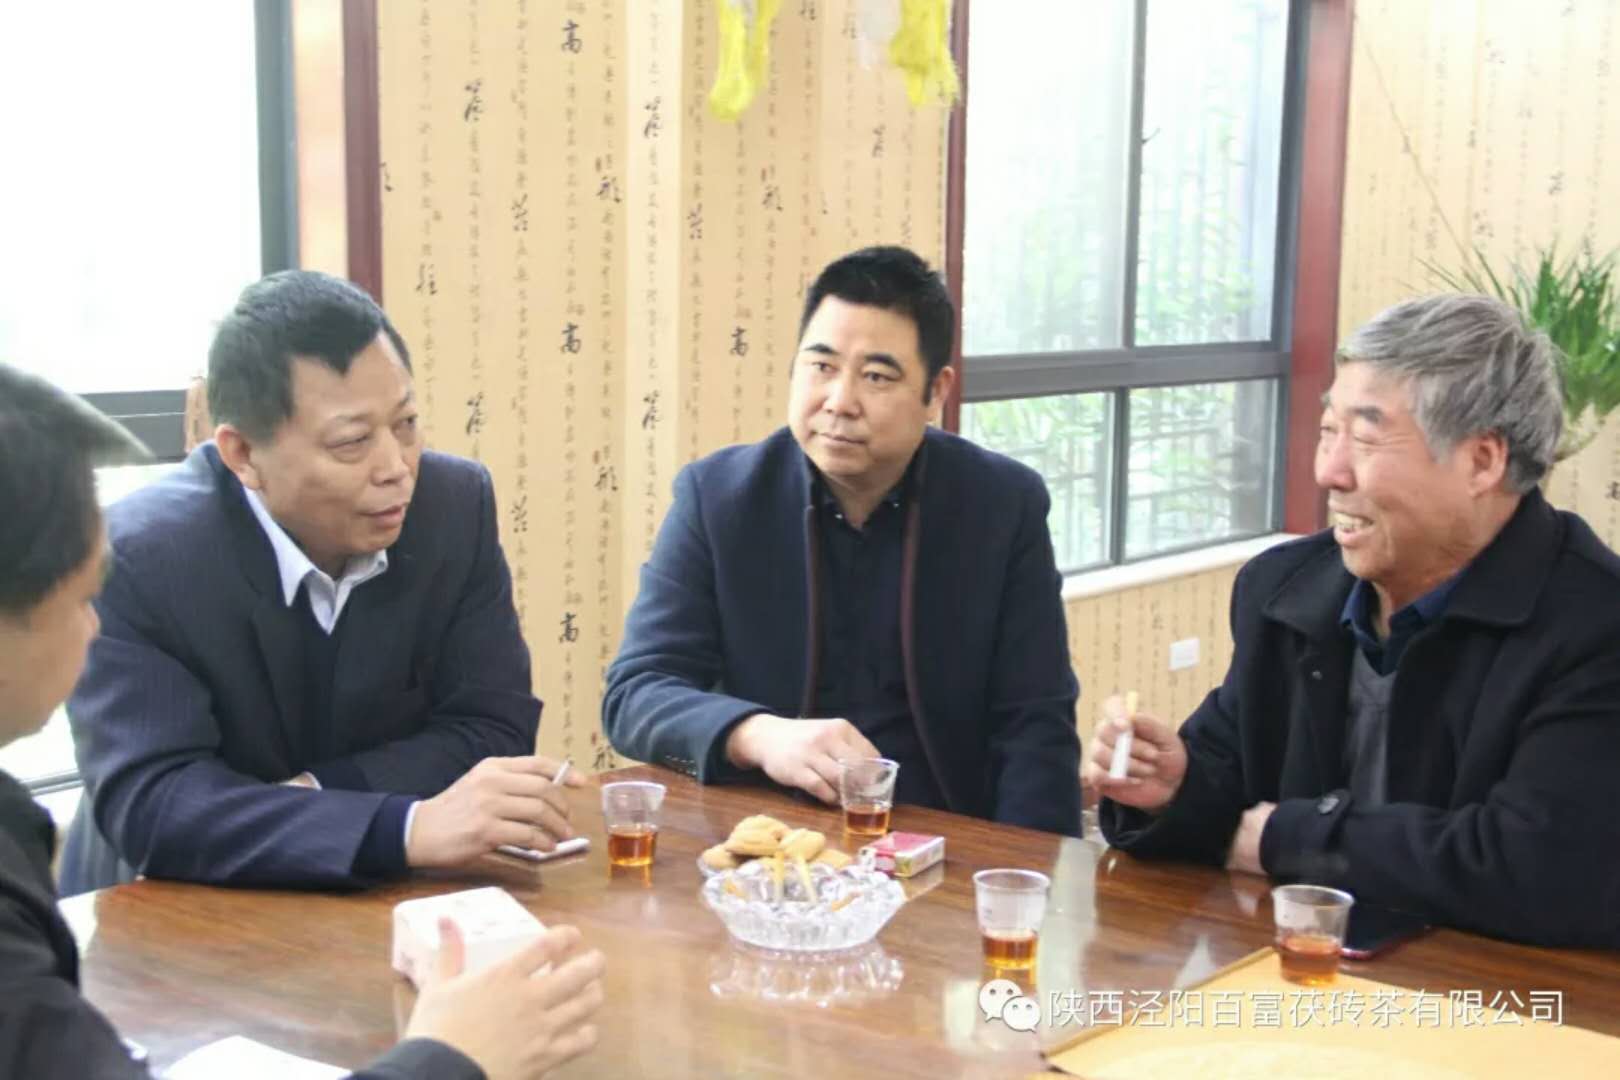 Beijing zhongxing agriculture chairman to visit our company!